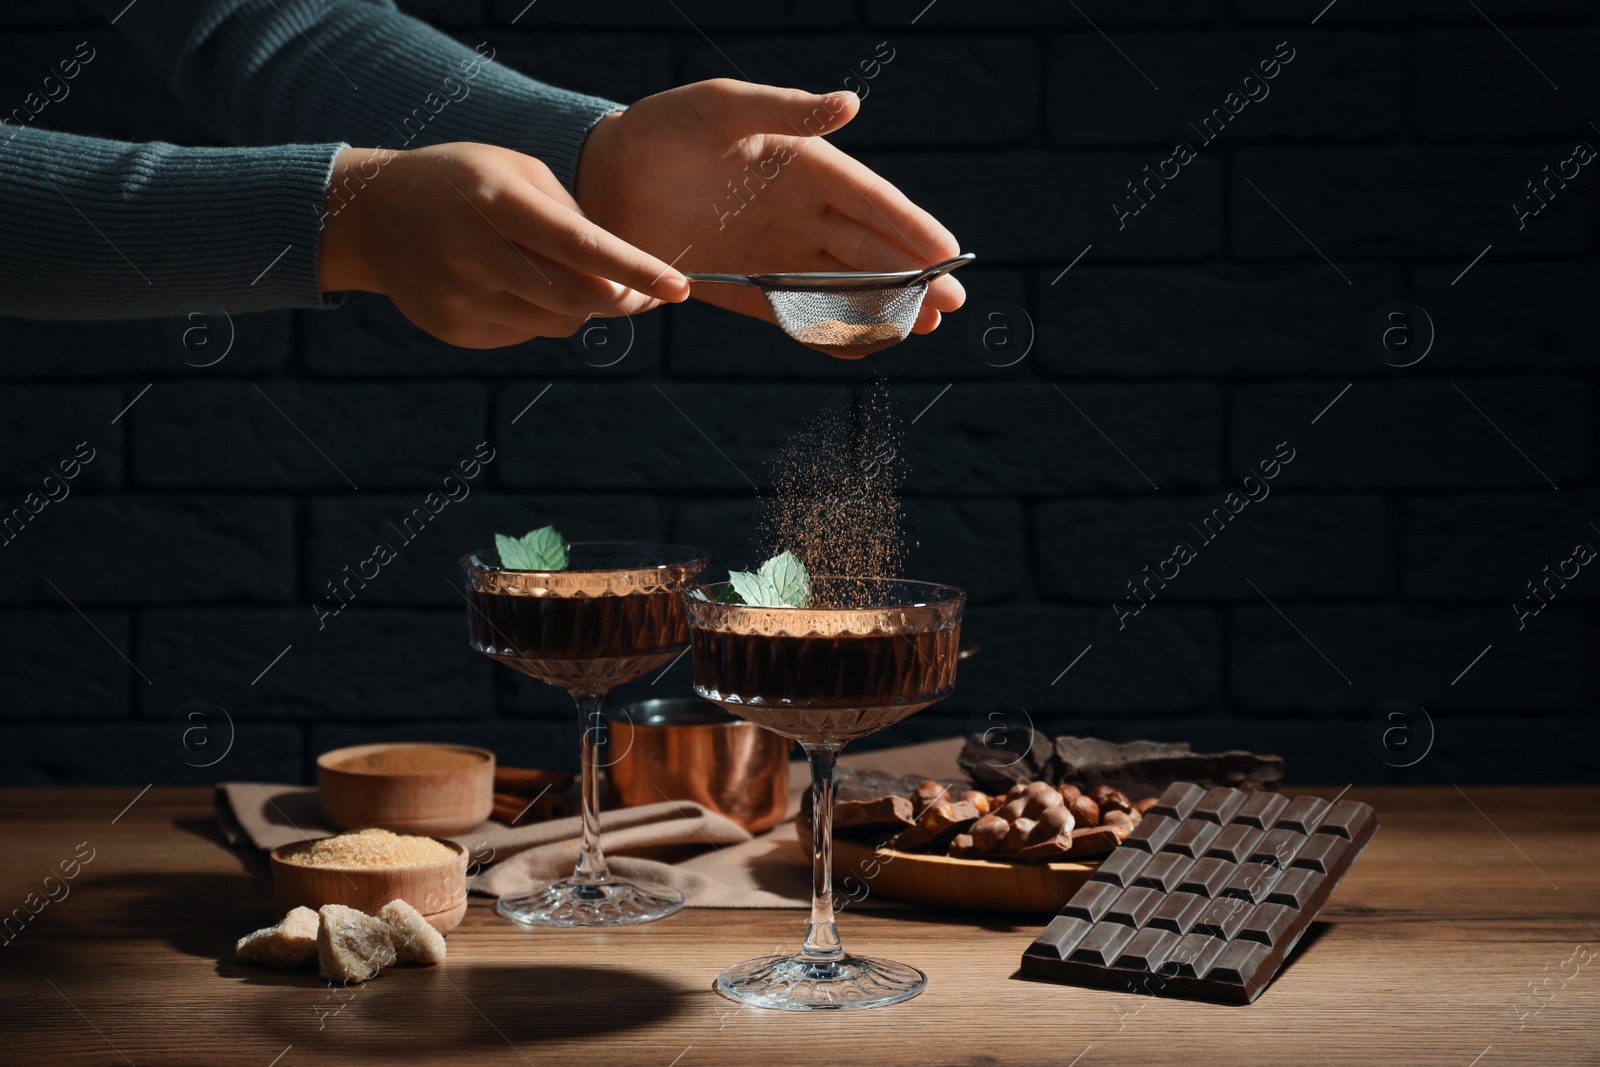 Photo of Woman decorating hot chocolate with cocoa powder at wooden table, closeup